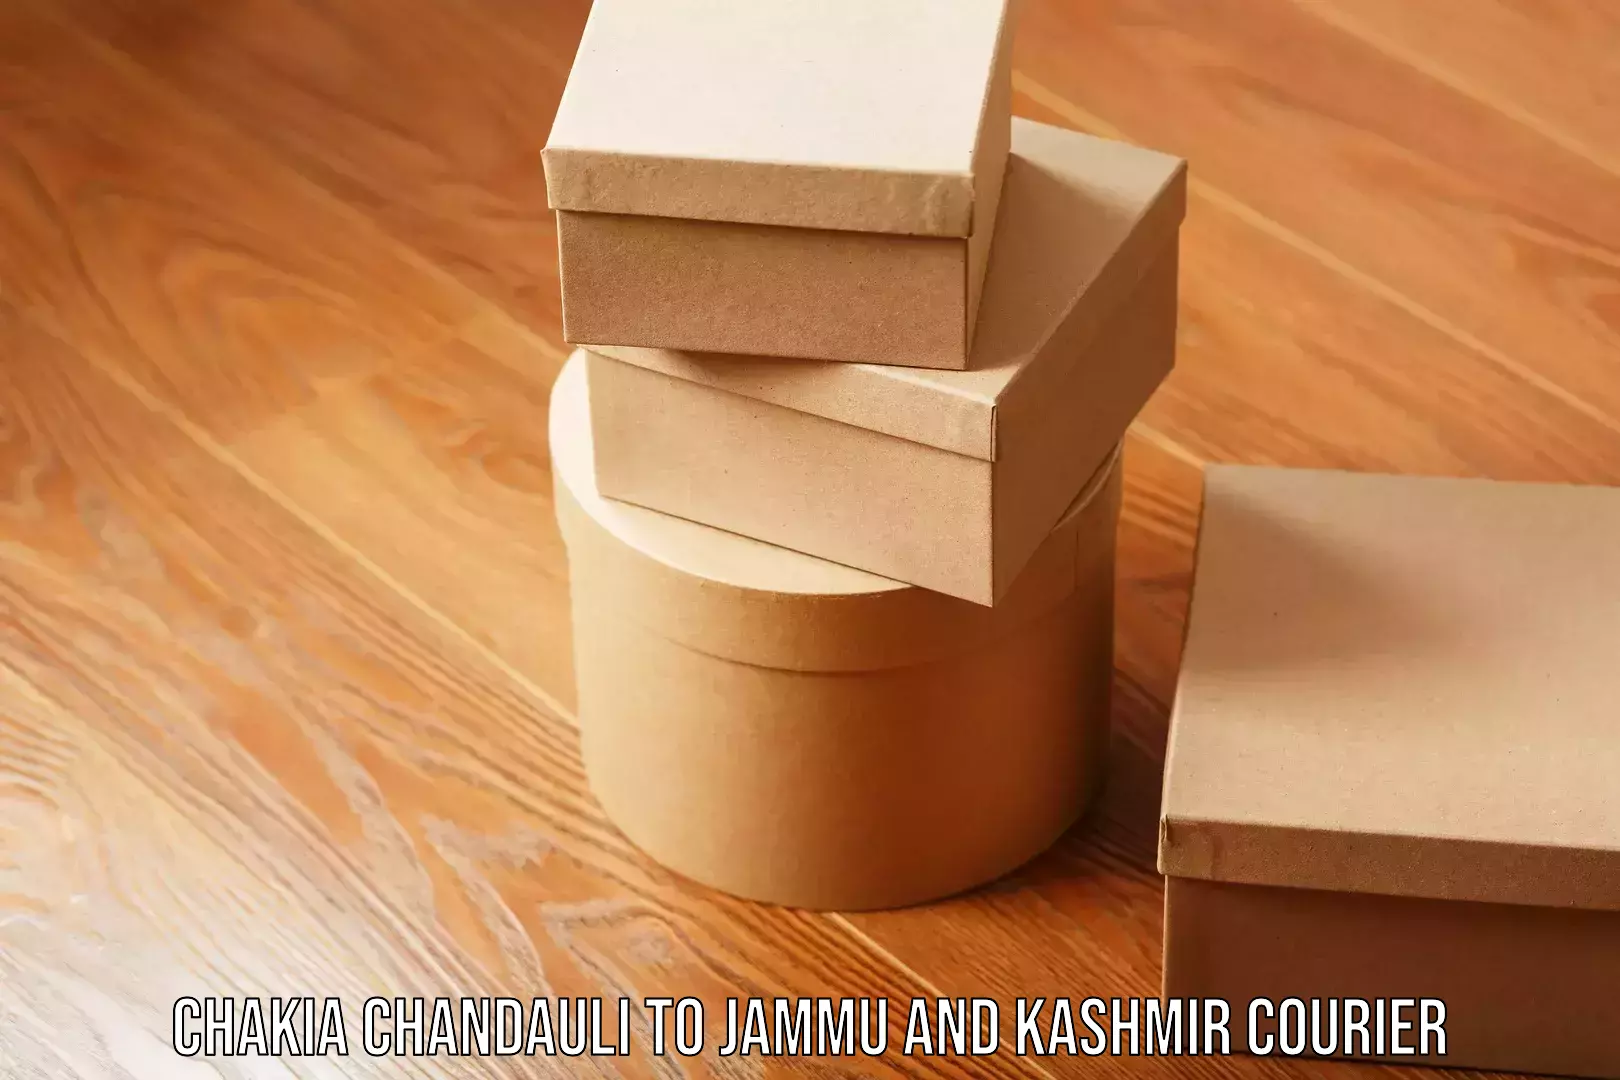 Sustainable courier practices Chakia Chandauli to Jammu and Kashmir